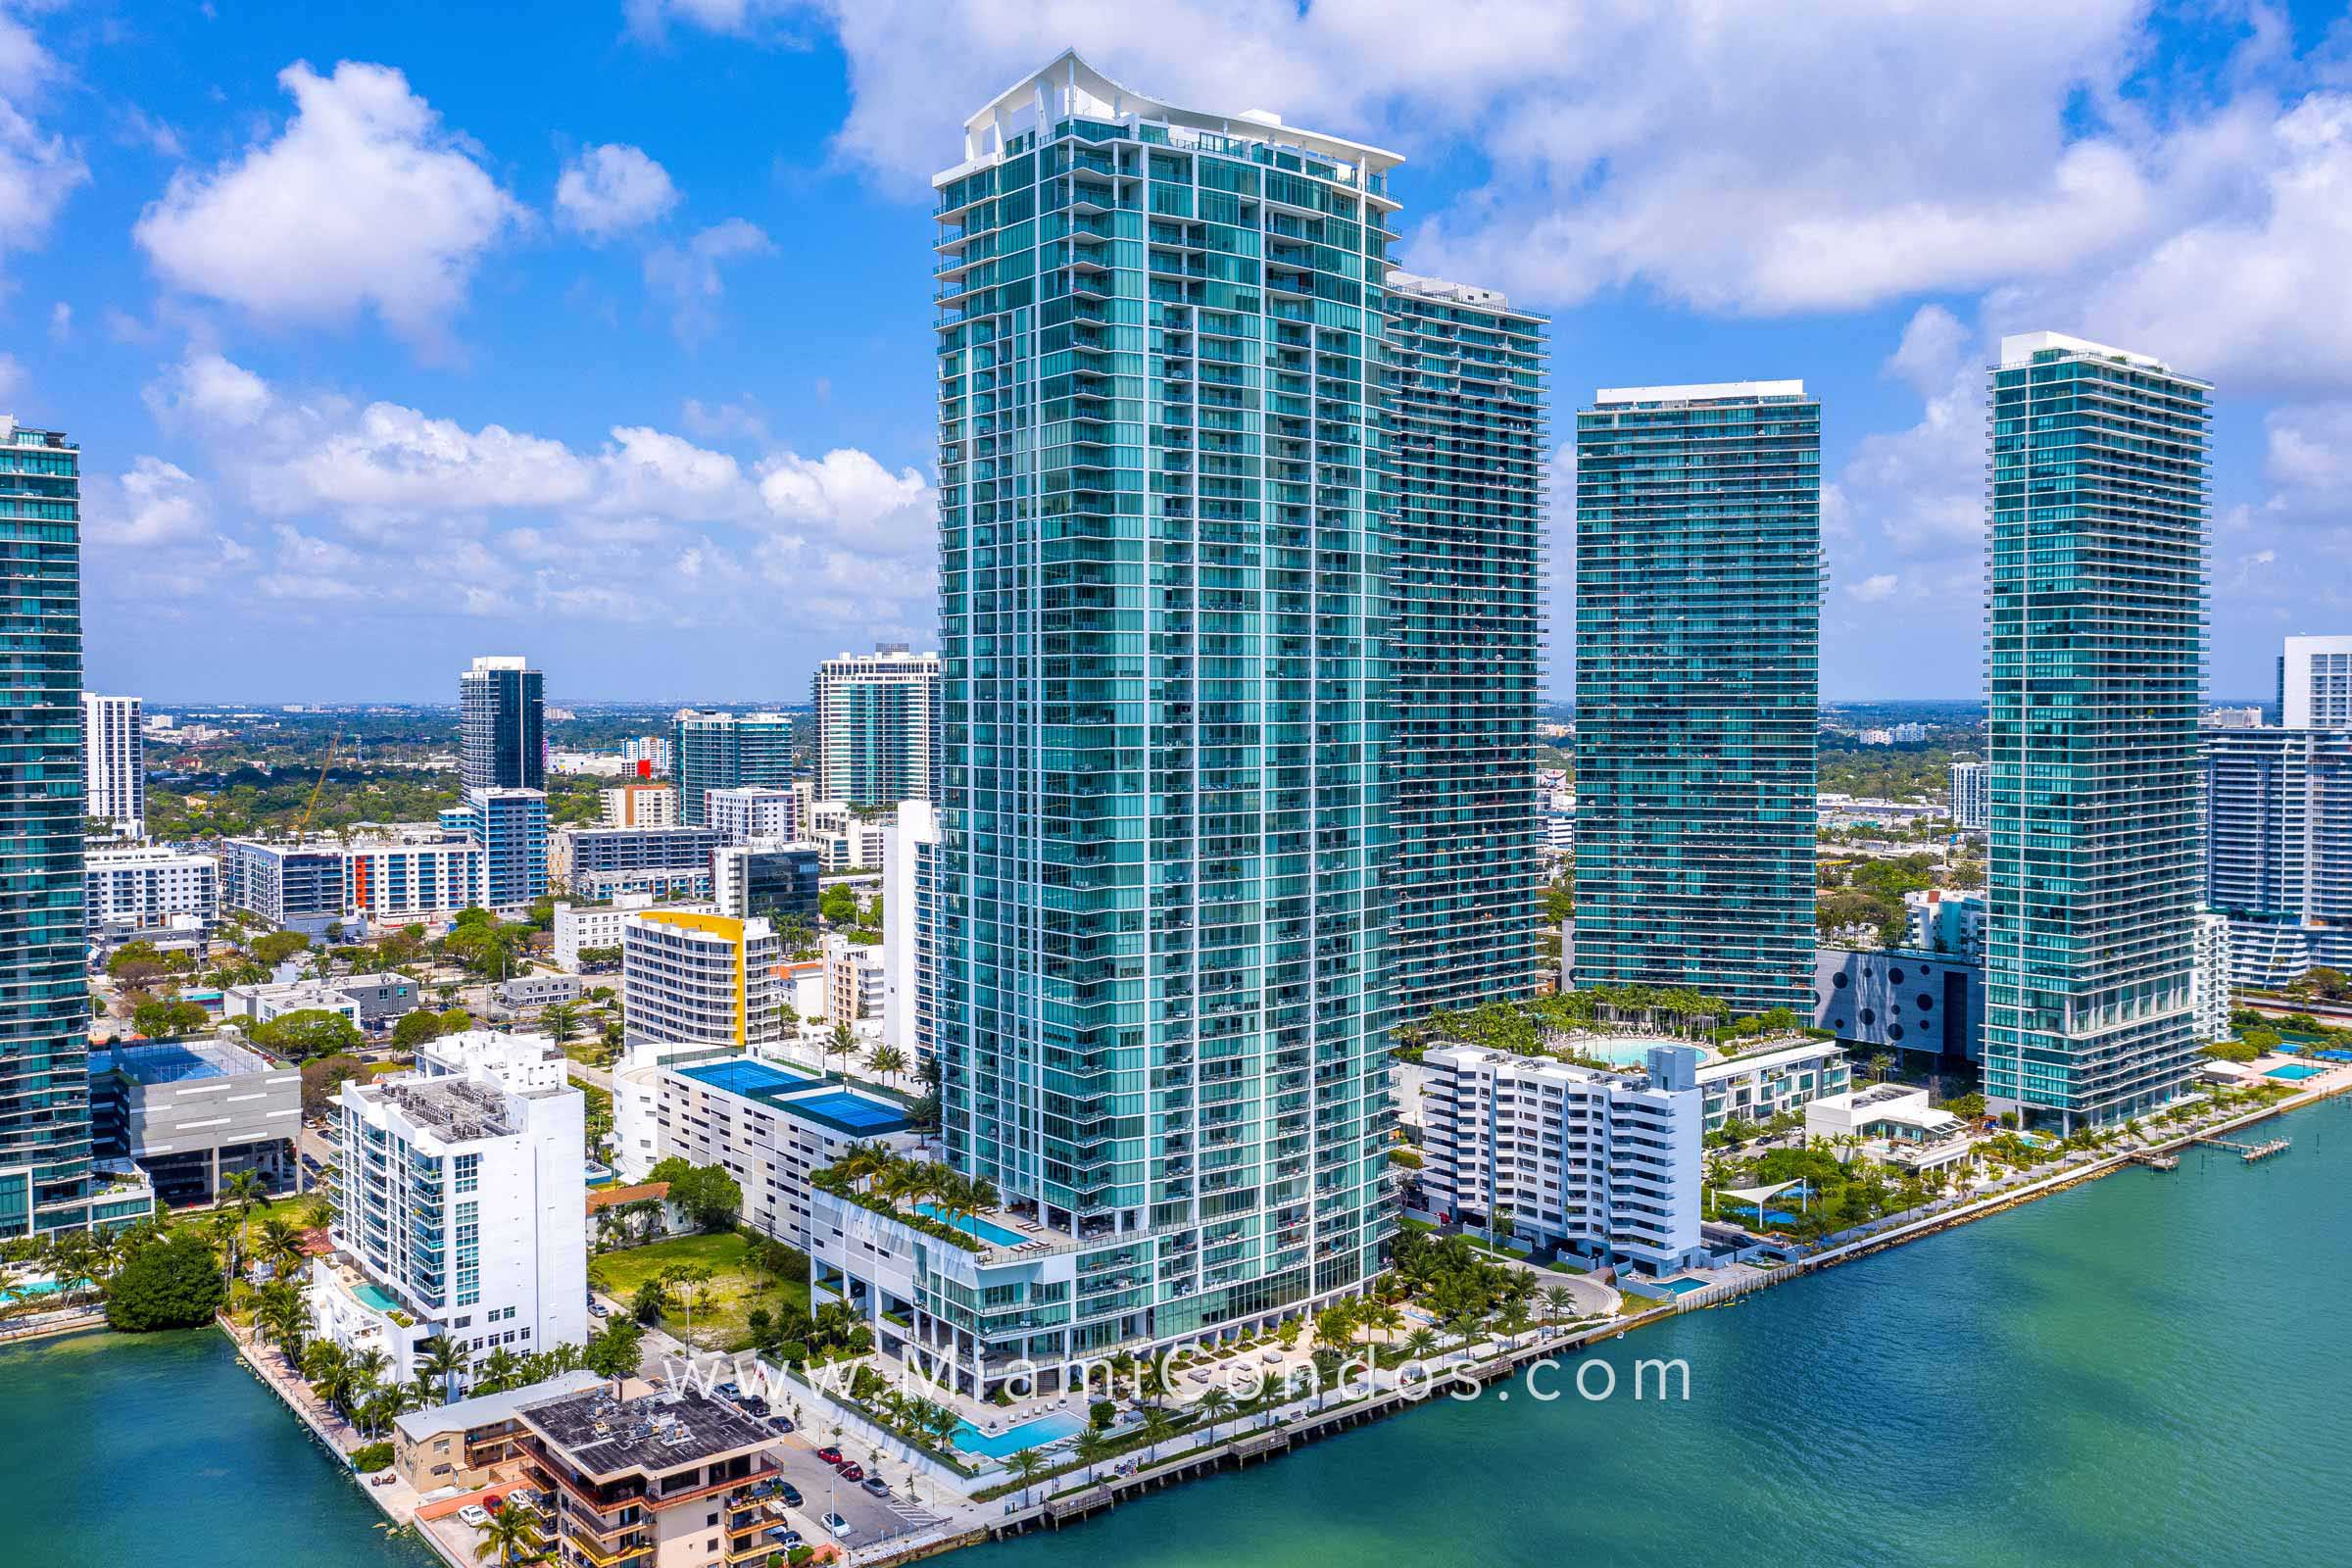 Biscayne Beach Condos in Edgewater